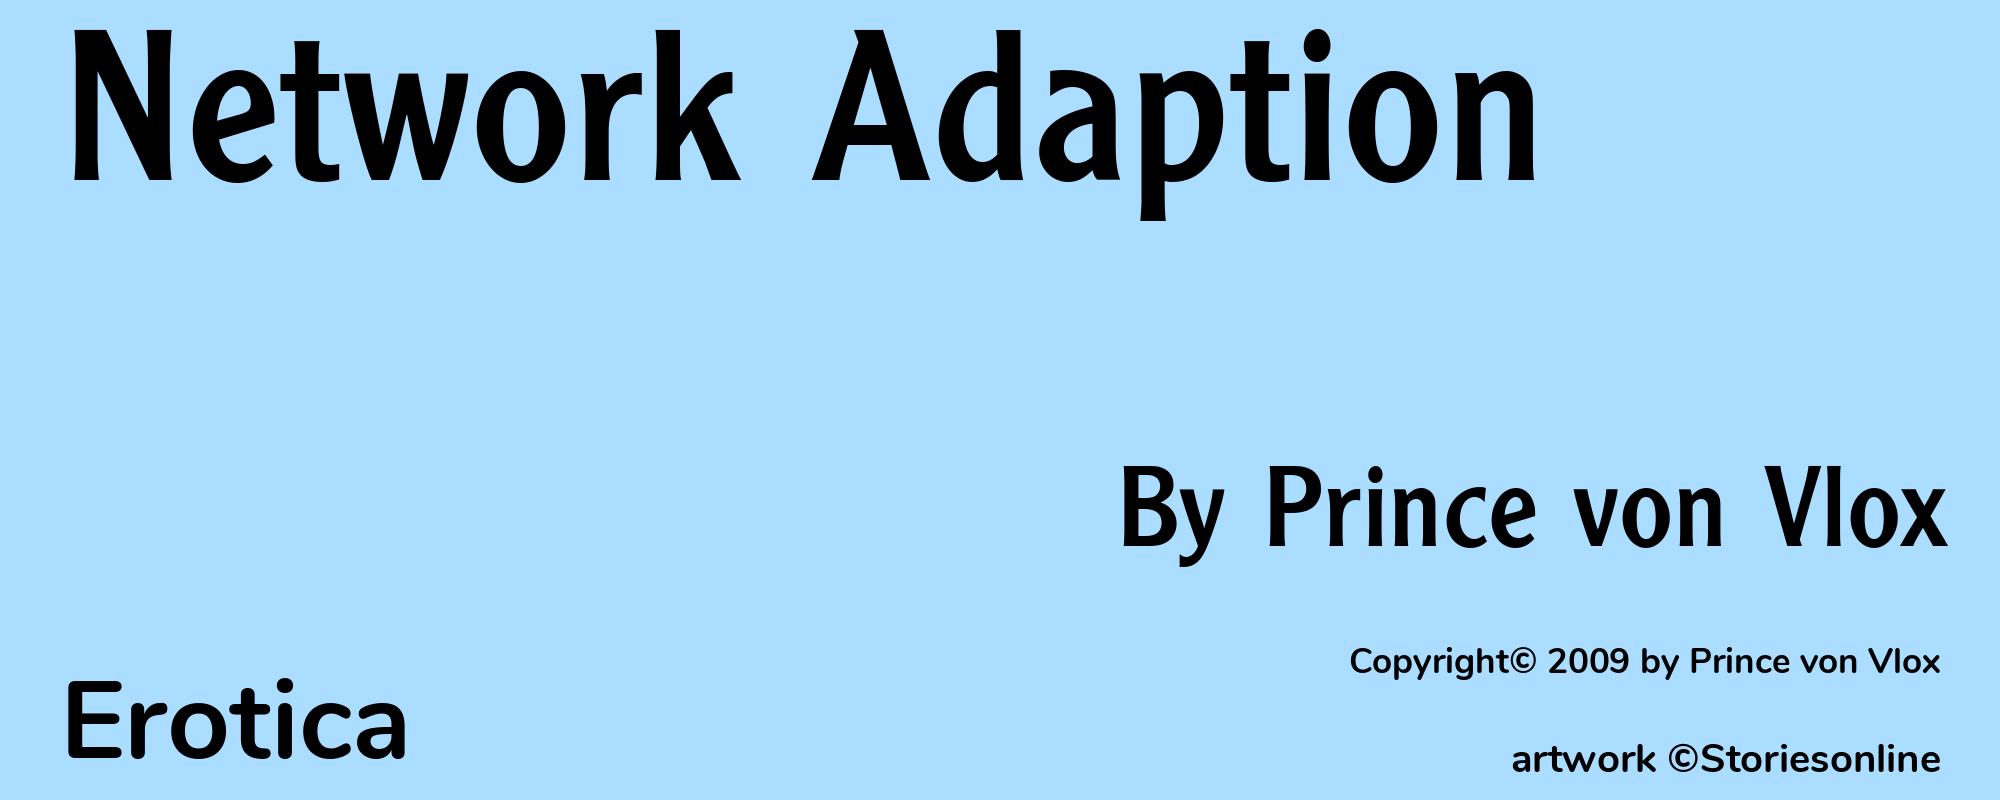 Network Adaption - Cover